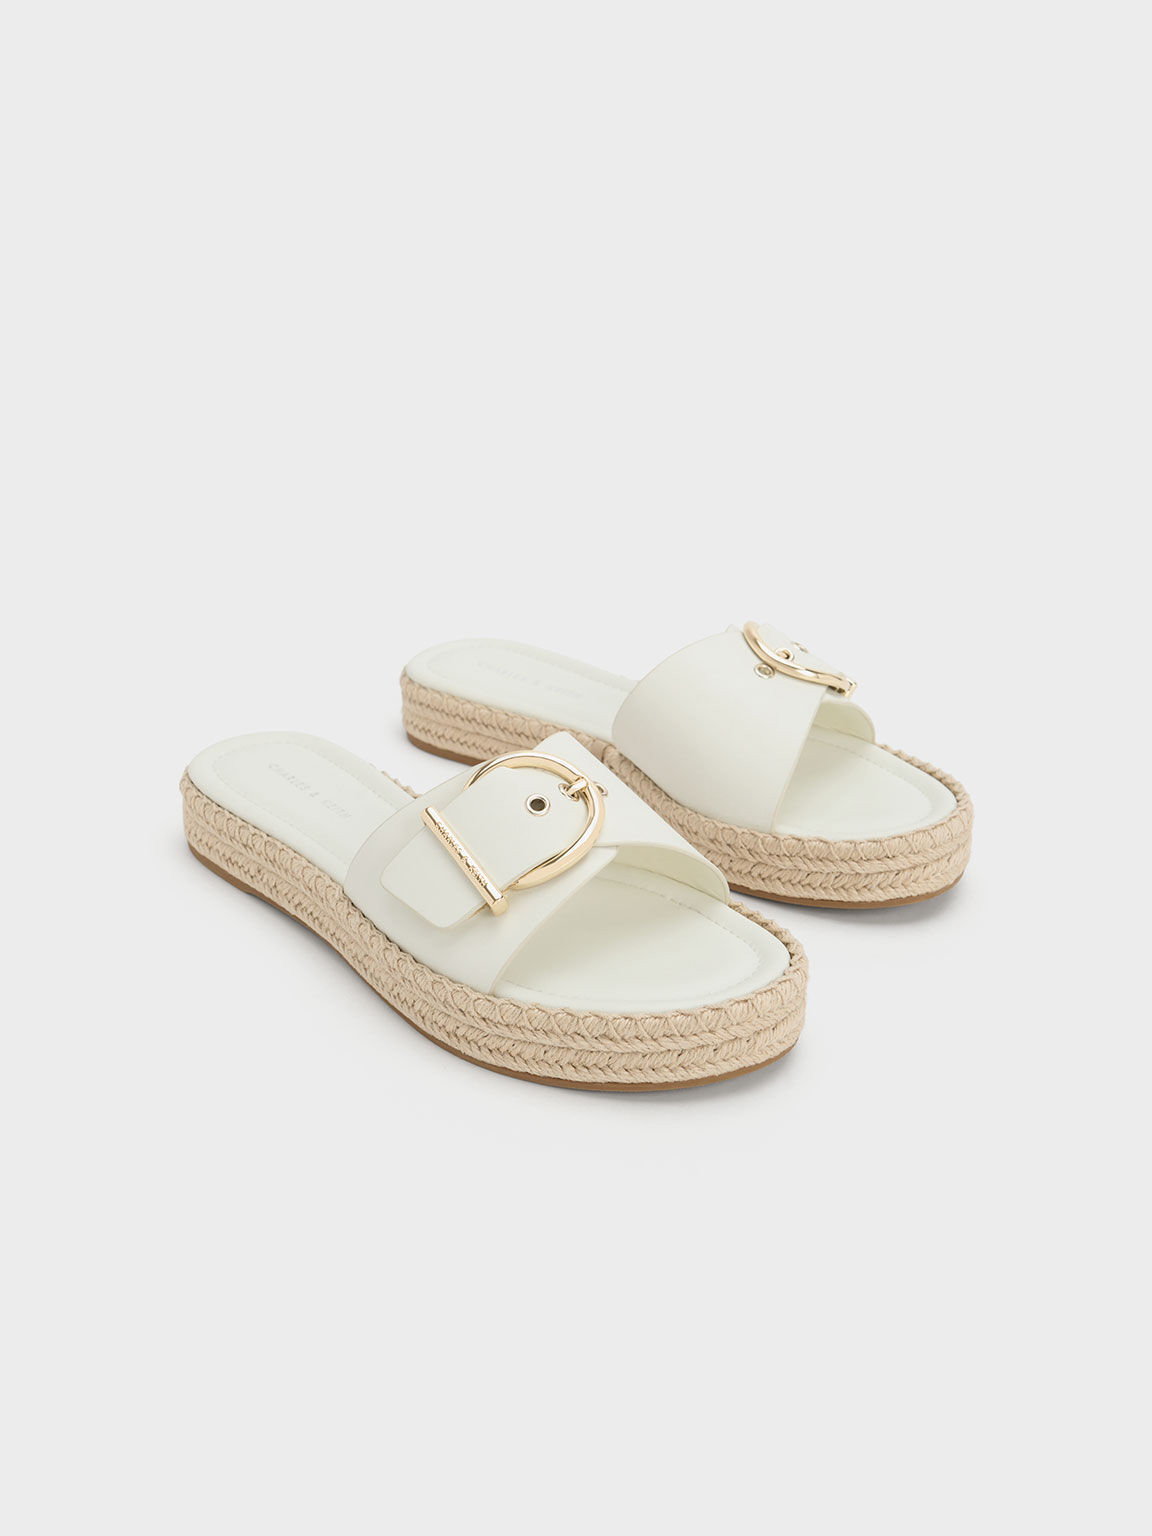 Chalk Buckled Espadrille Flat Sandals - CHARLES & KEITH IN